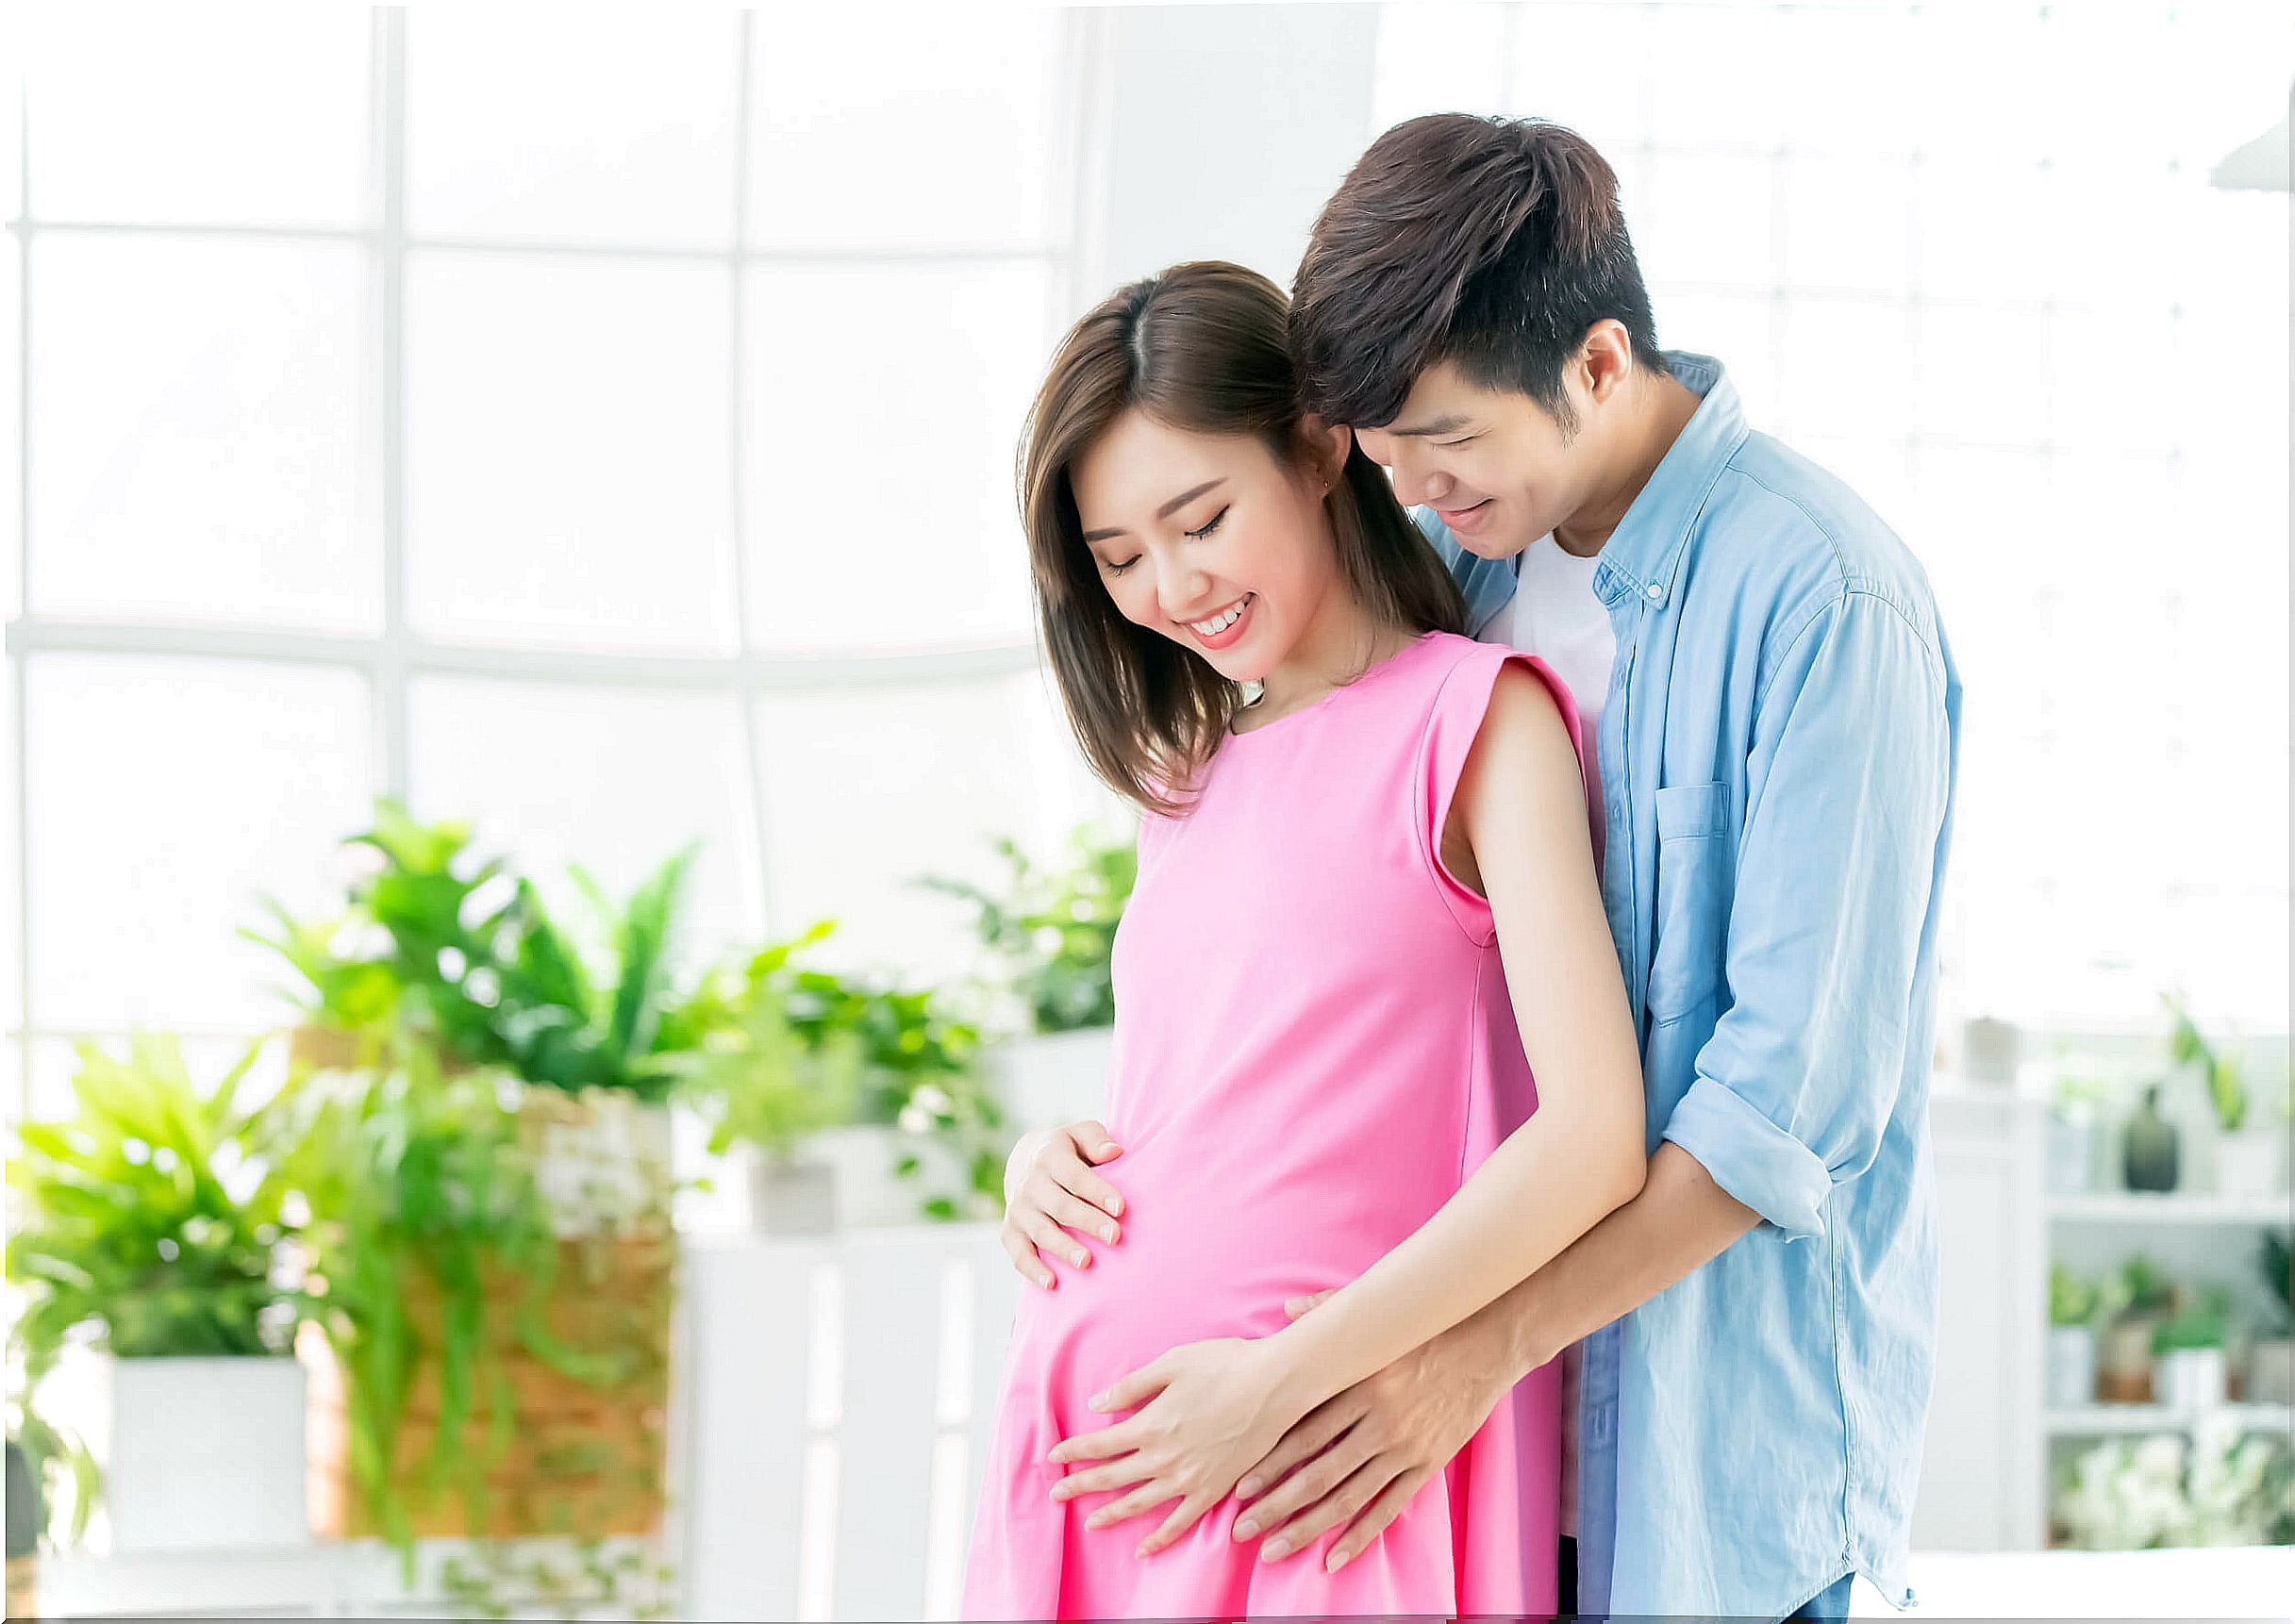 Family support during pregnancy is important.